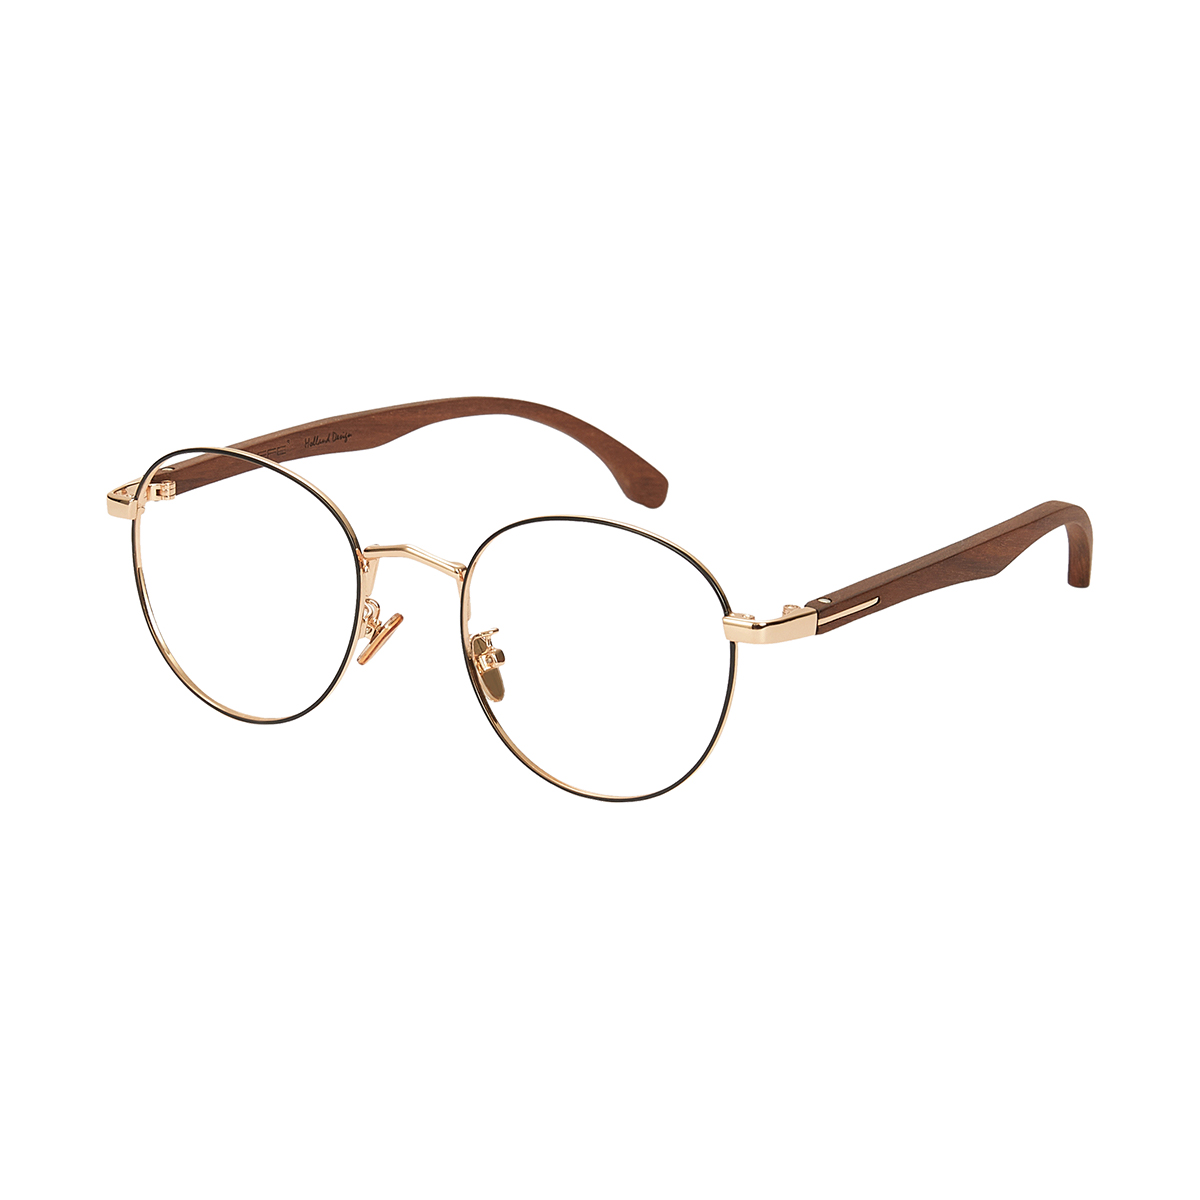 Cadmus - Round Rosewood-Gold Reading Glasses for Men